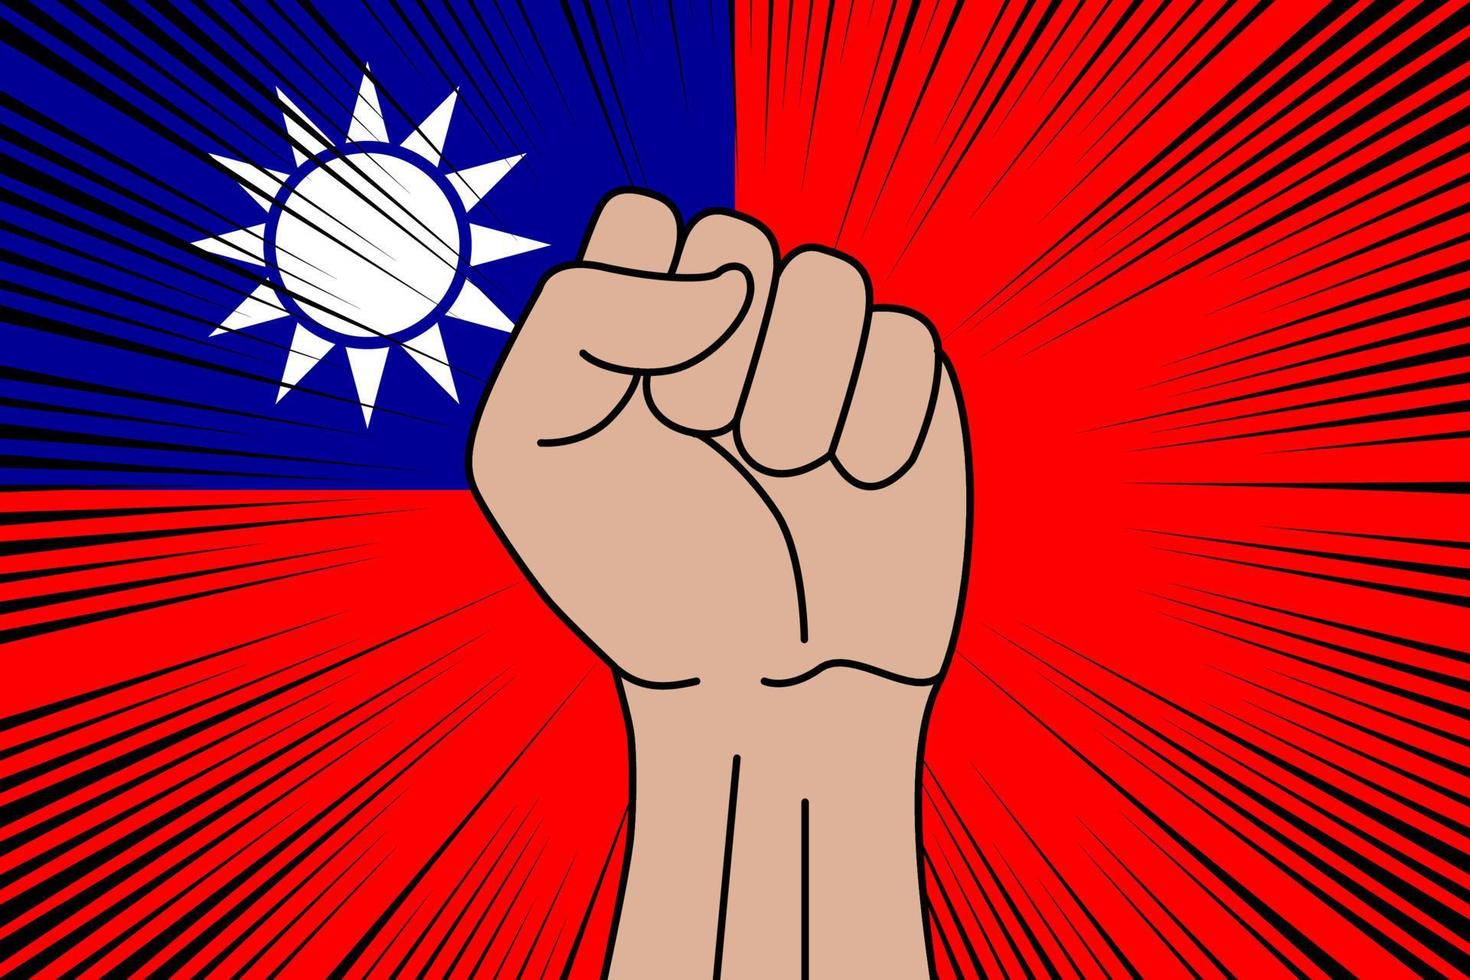 Human fist clenched symbol on flag of Taiwan vector